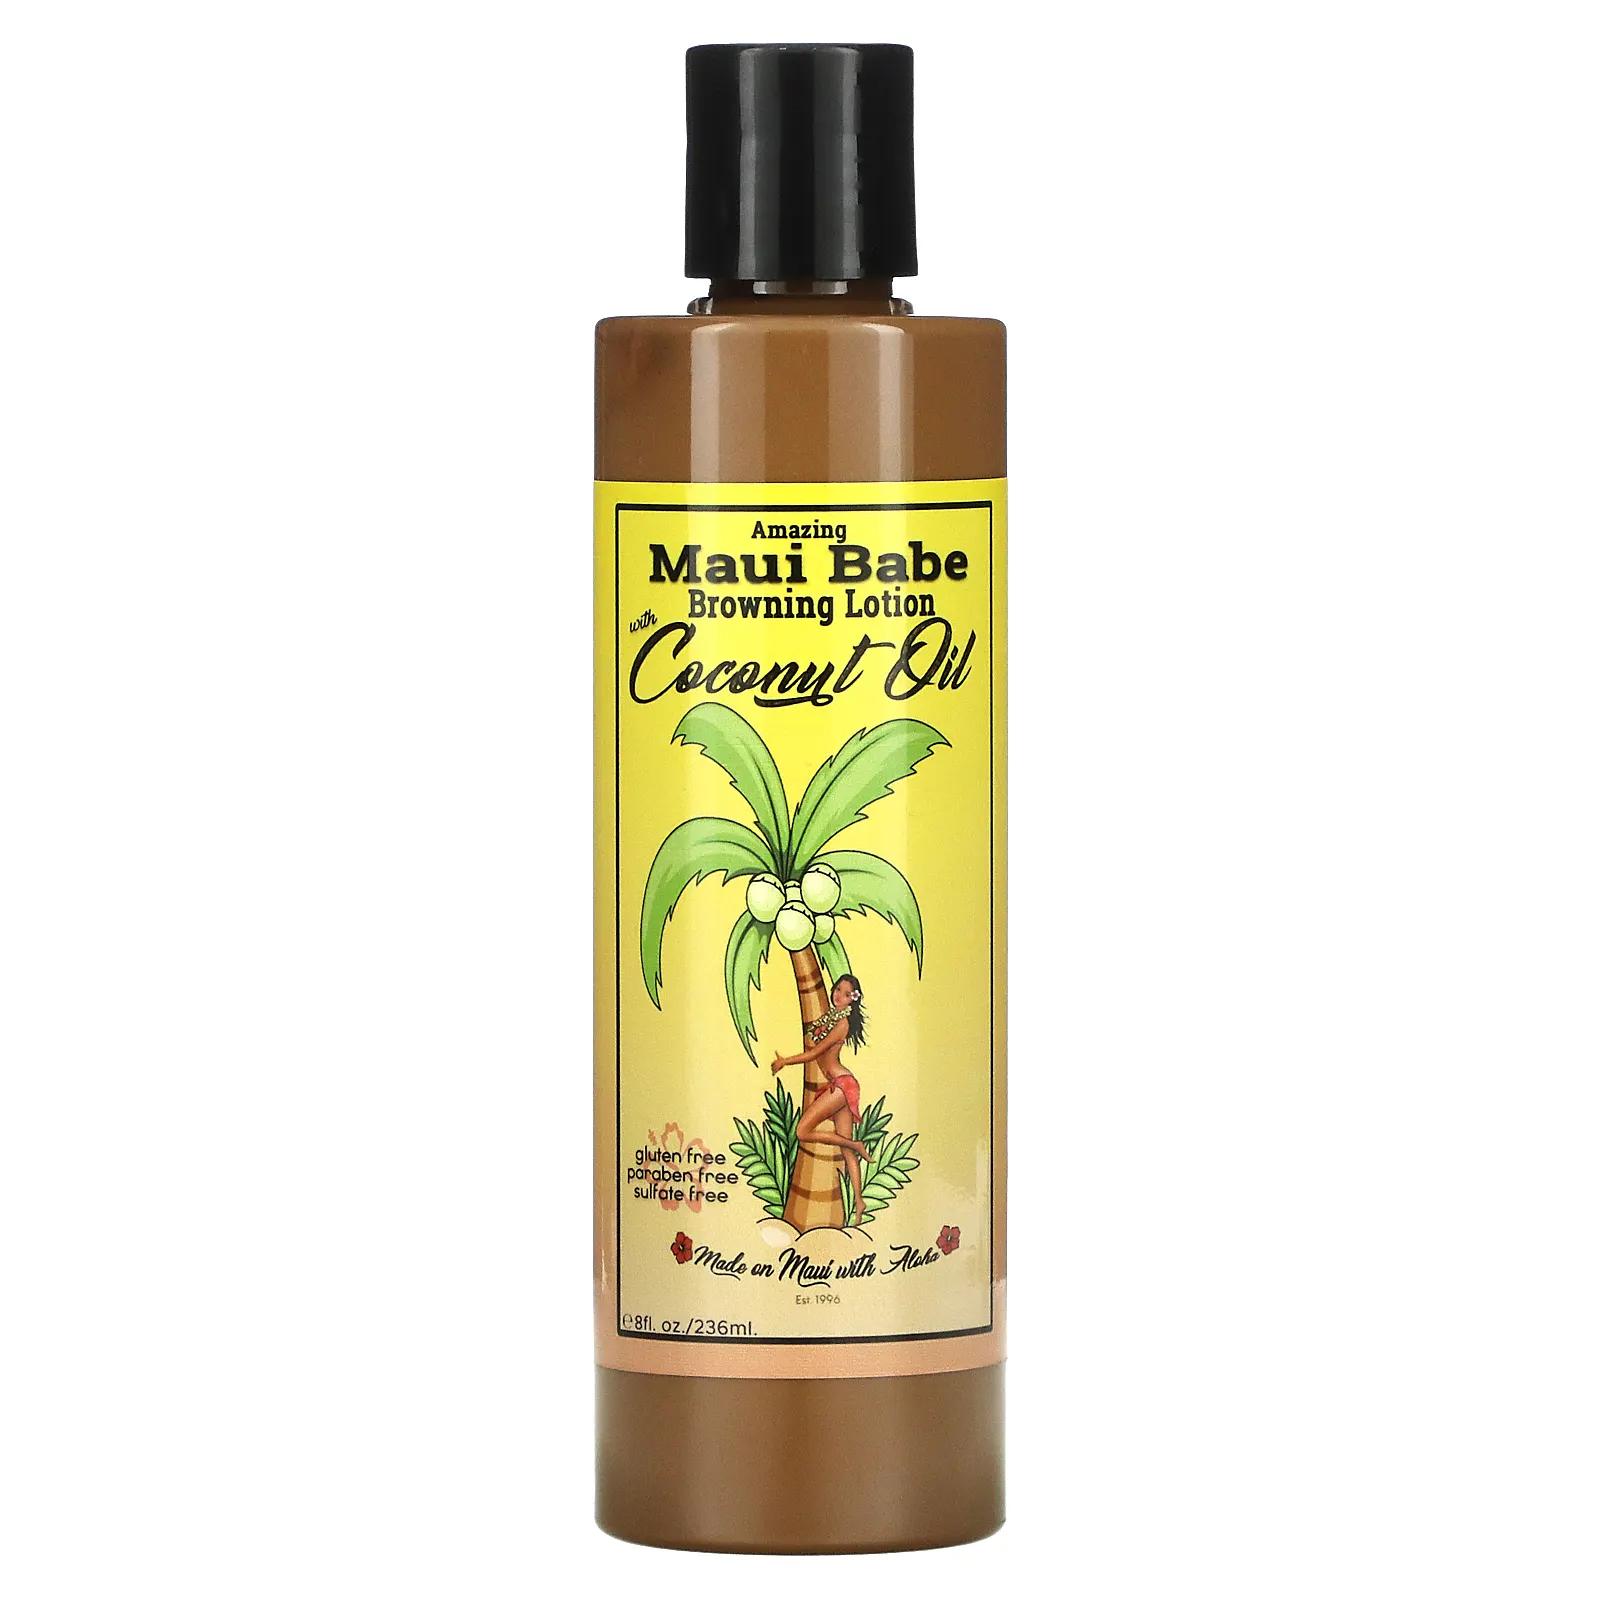 Maui Babe Amazing Browning Lotion with Coconut Oil 8 fl oz (236 ml) maui babe amazing browning lotion лосьон для загара 236